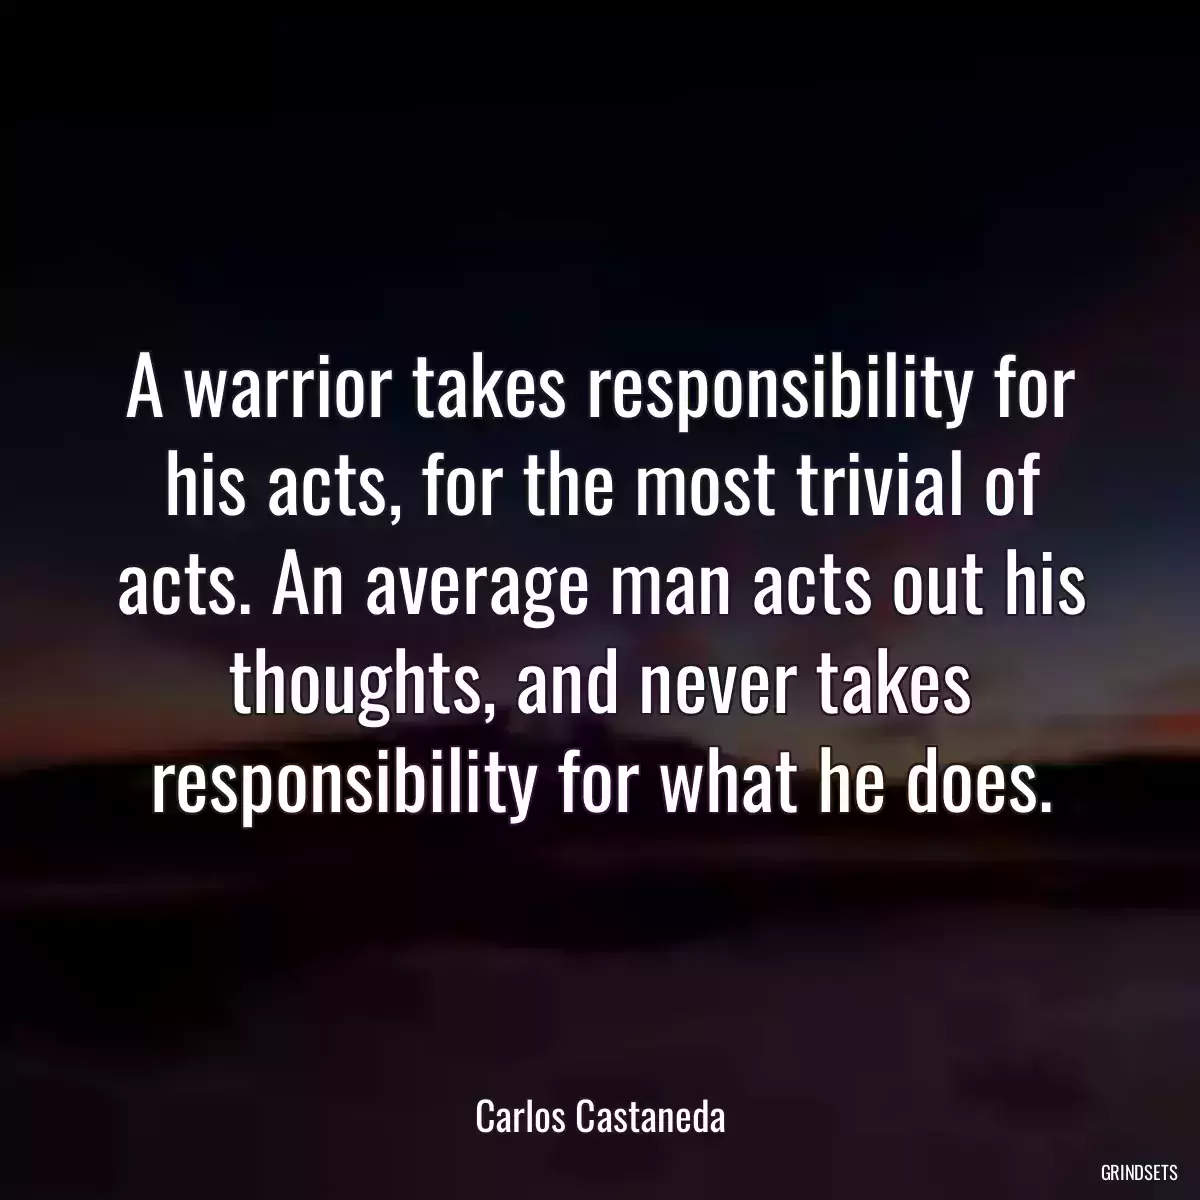 A warrior takes responsibility for his acts, for the most trivial of acts. An average man acts out his thoughts, and never takes responsibility for what he does.